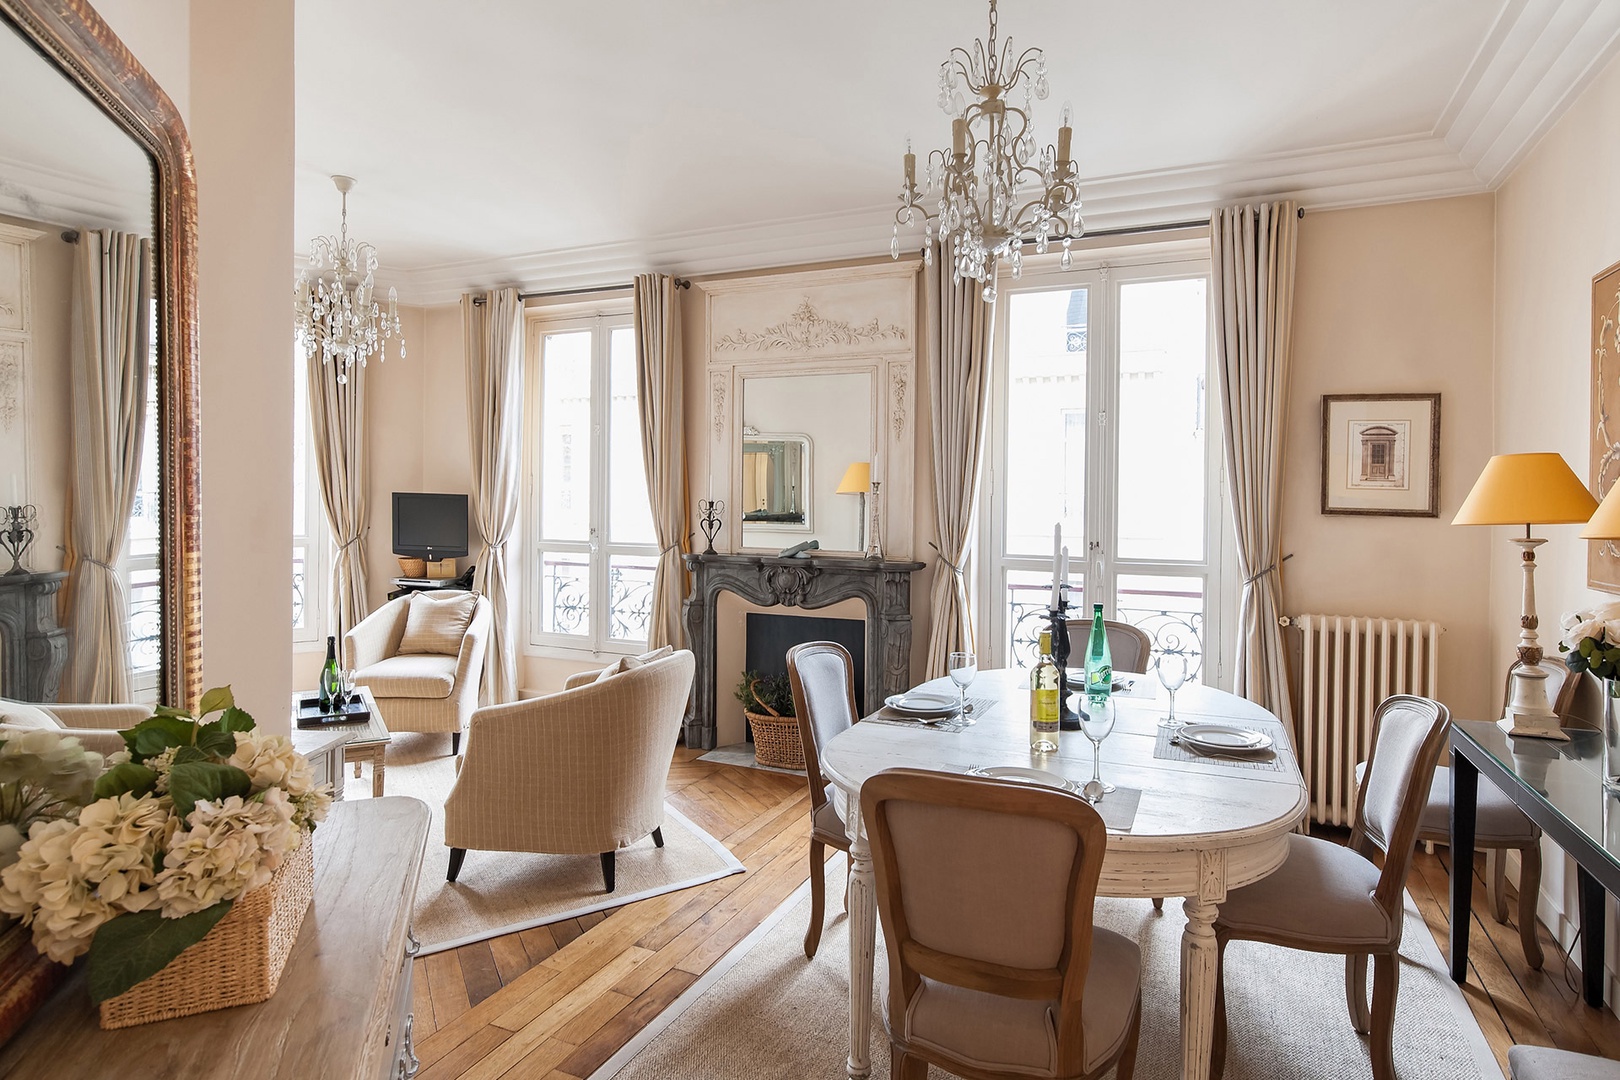 Step into the elegant living and dining room.